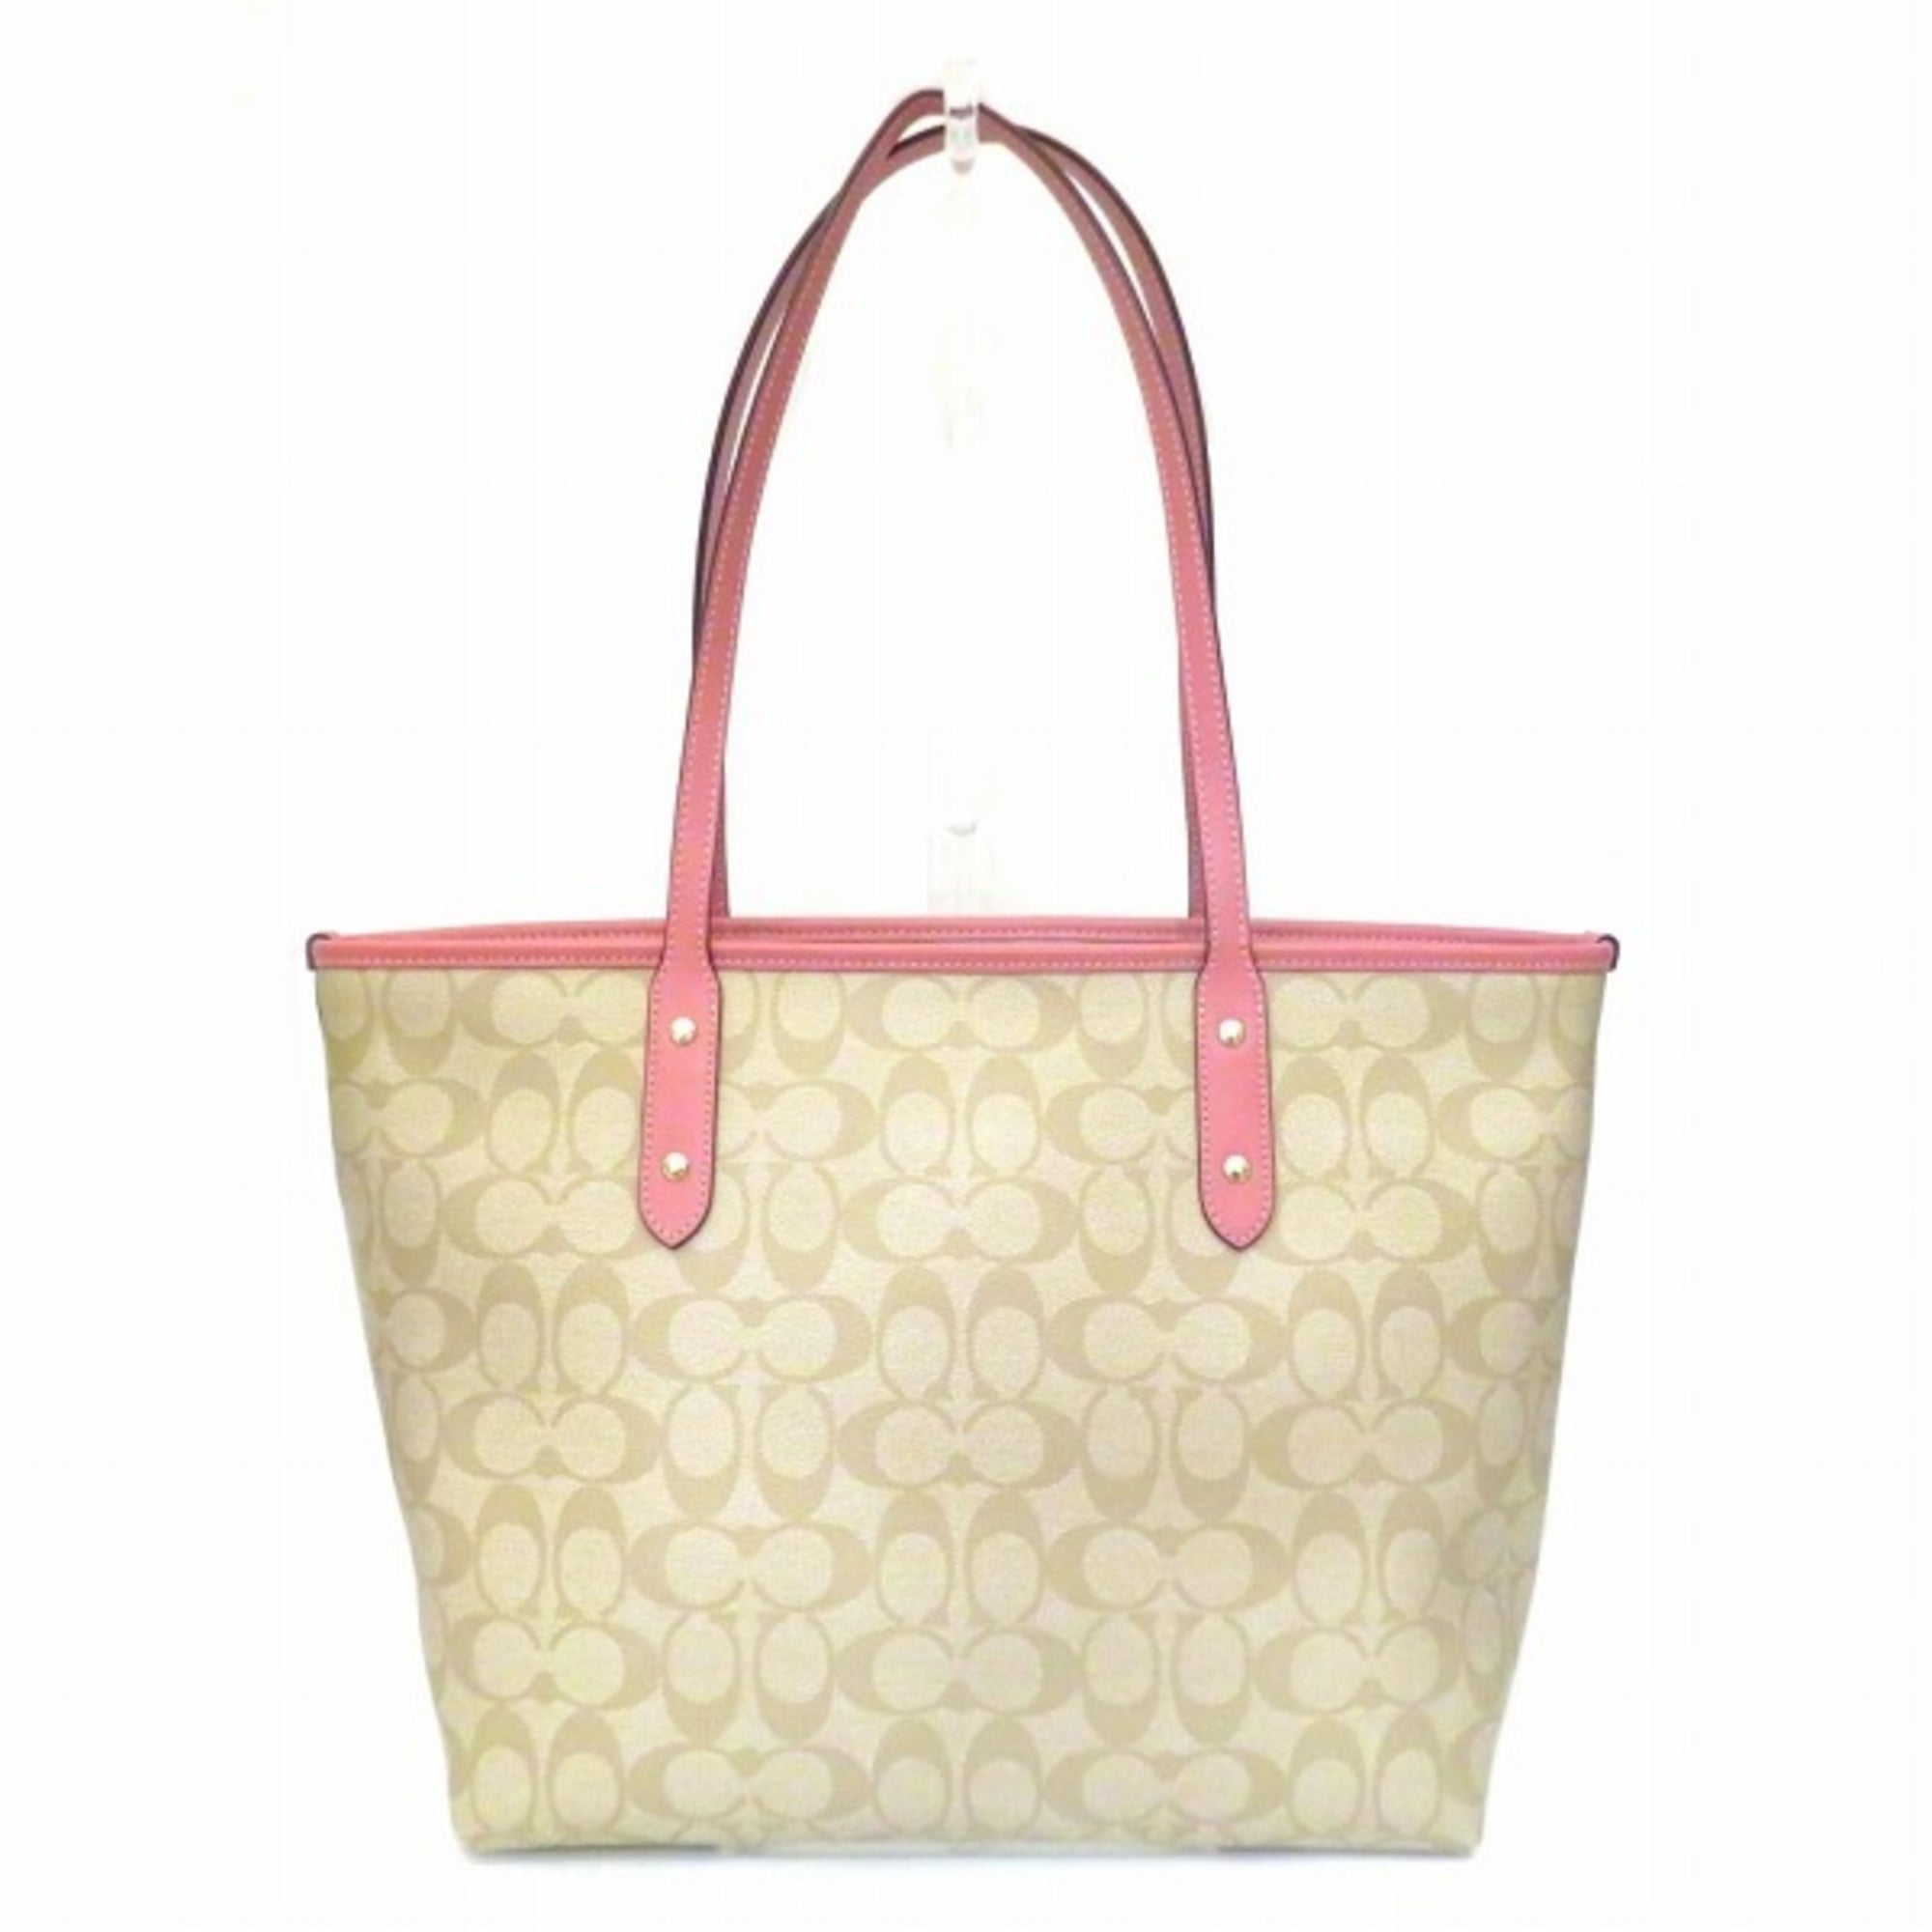 COACH Pebbled Leather Town Tote SKU: 9445378 